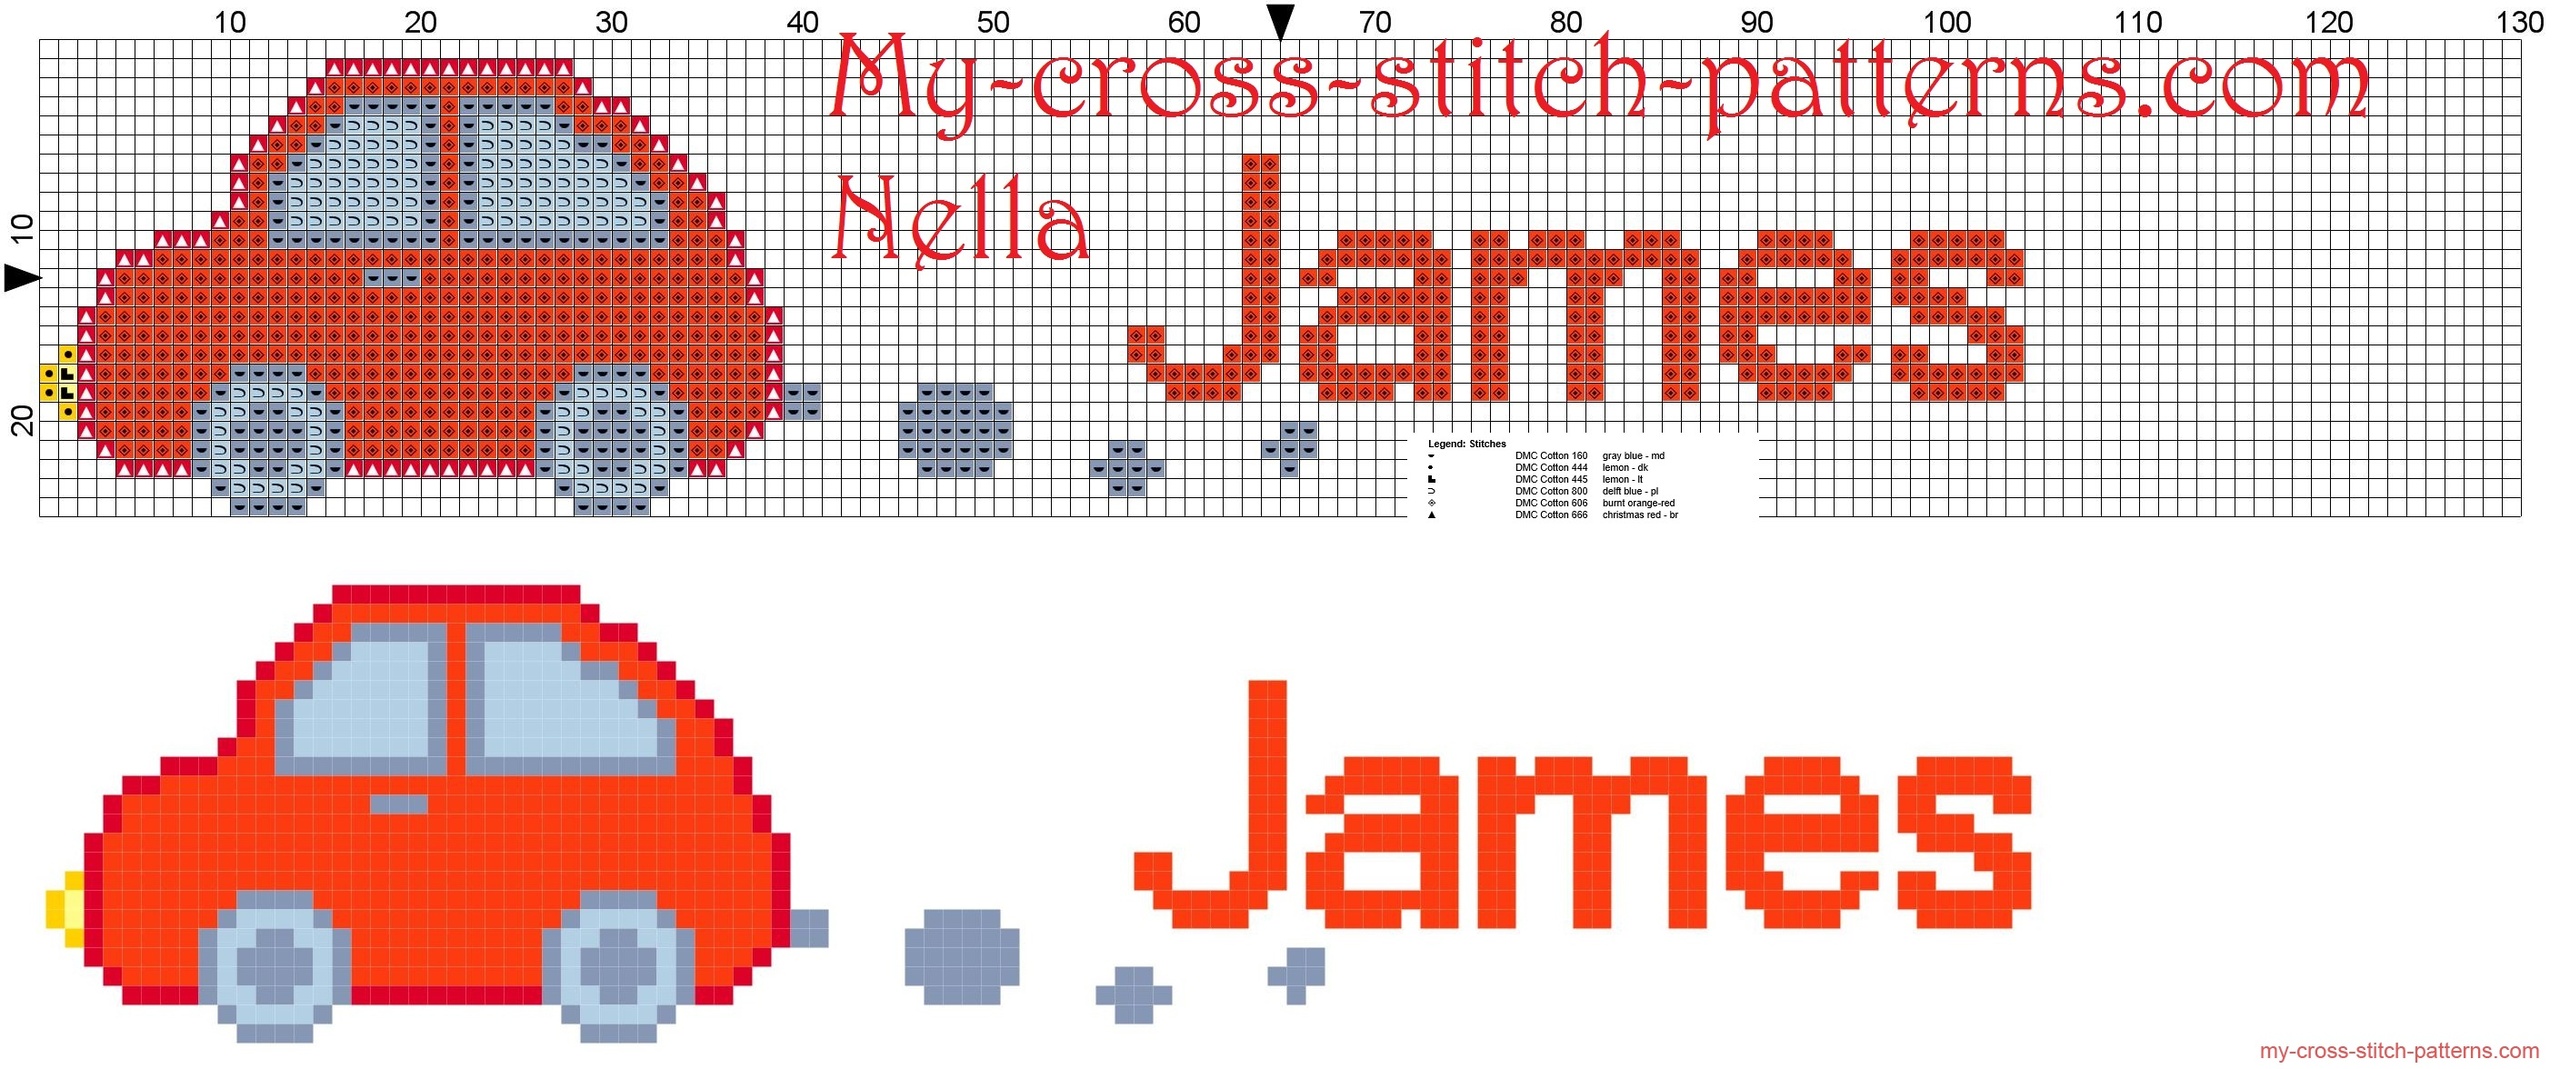 jamies_name_with_toy_car_cross_stitch_patterns